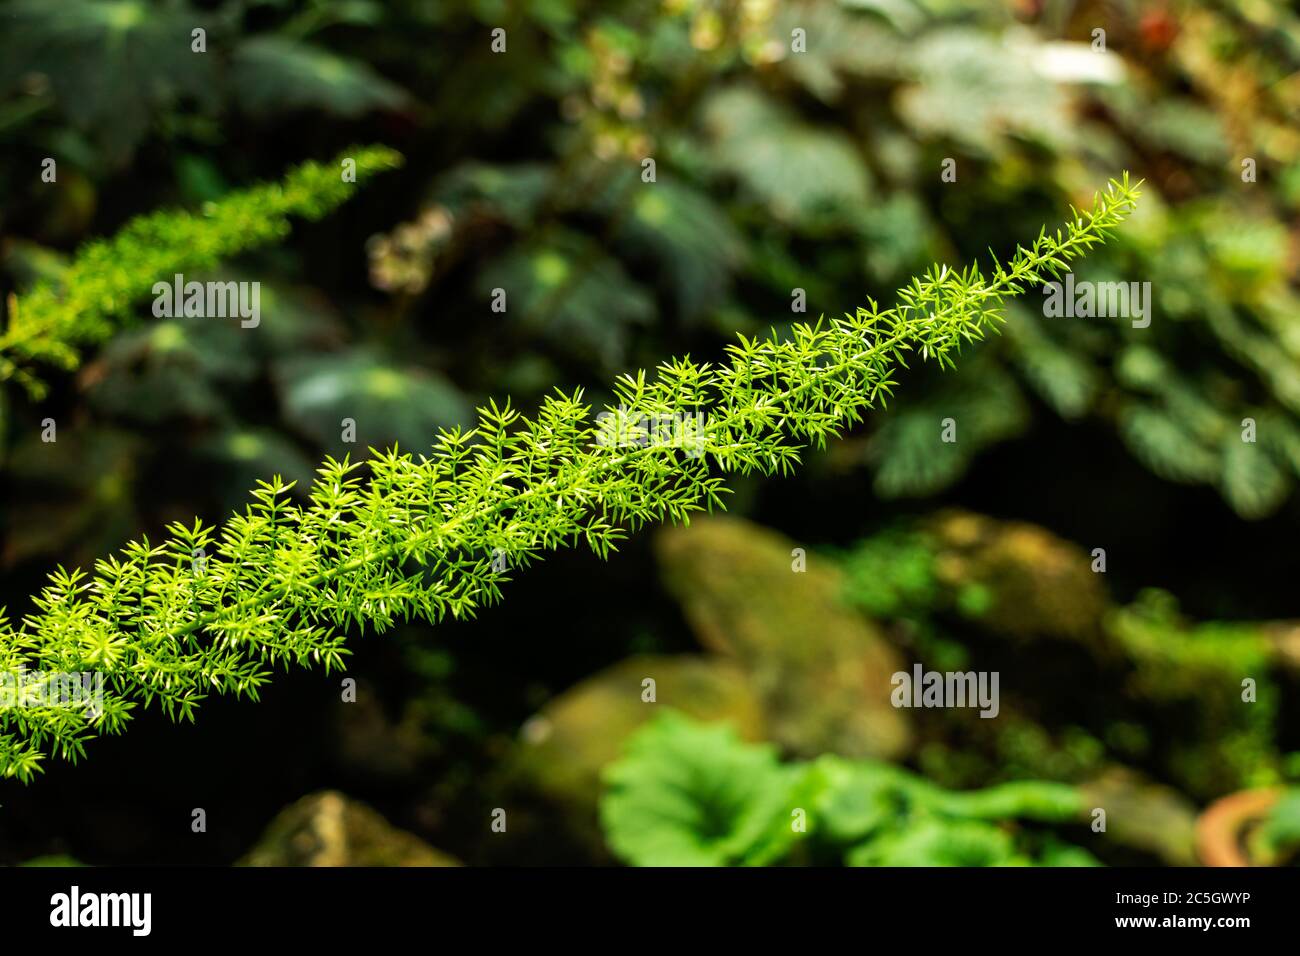 A plant growing in sunlight and showcasing green environment Stock Photo